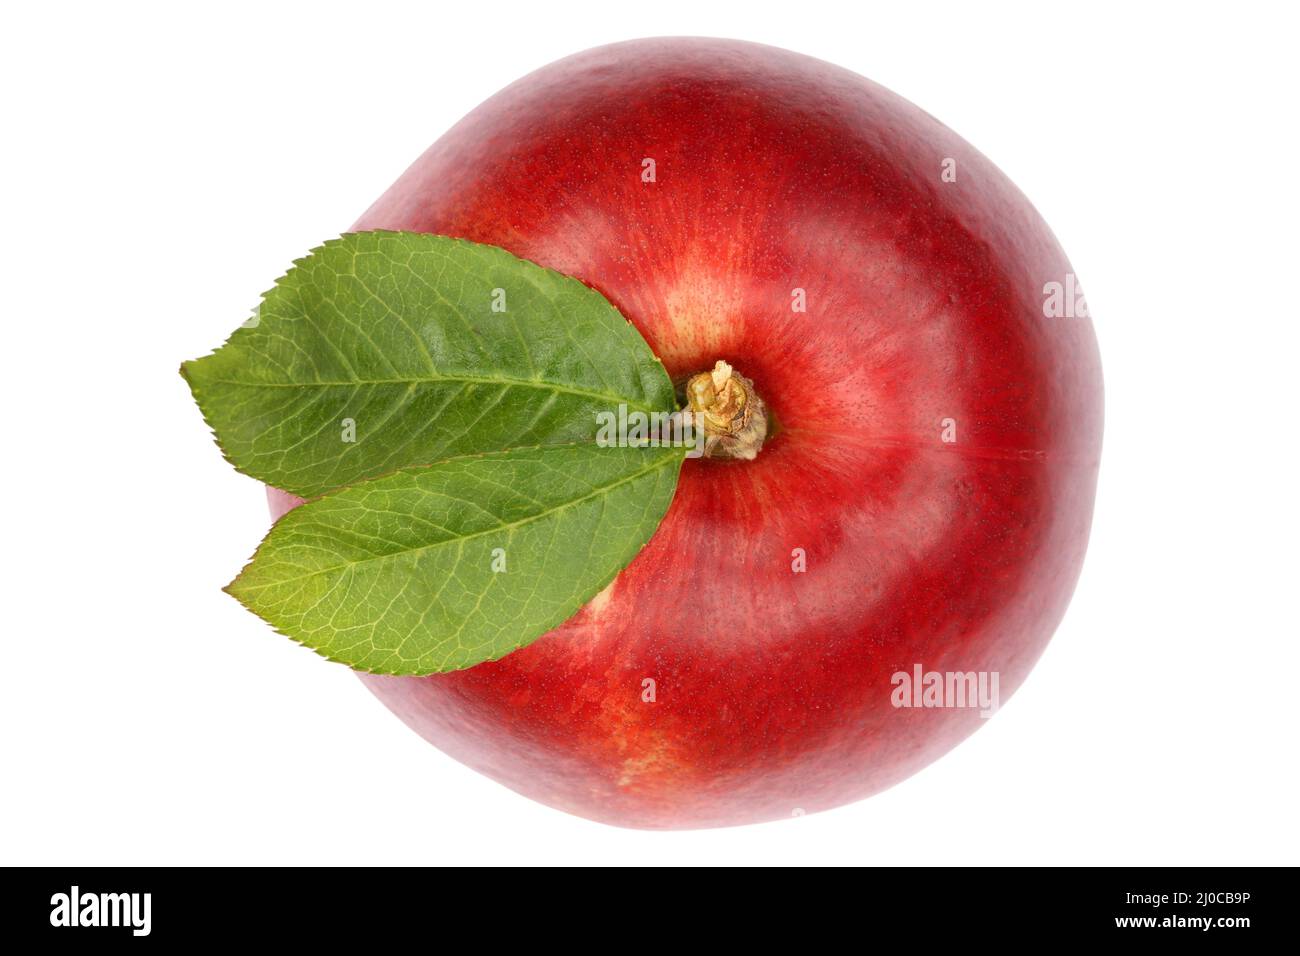 Nectarine fruit from above cropped isolated Stock Photo